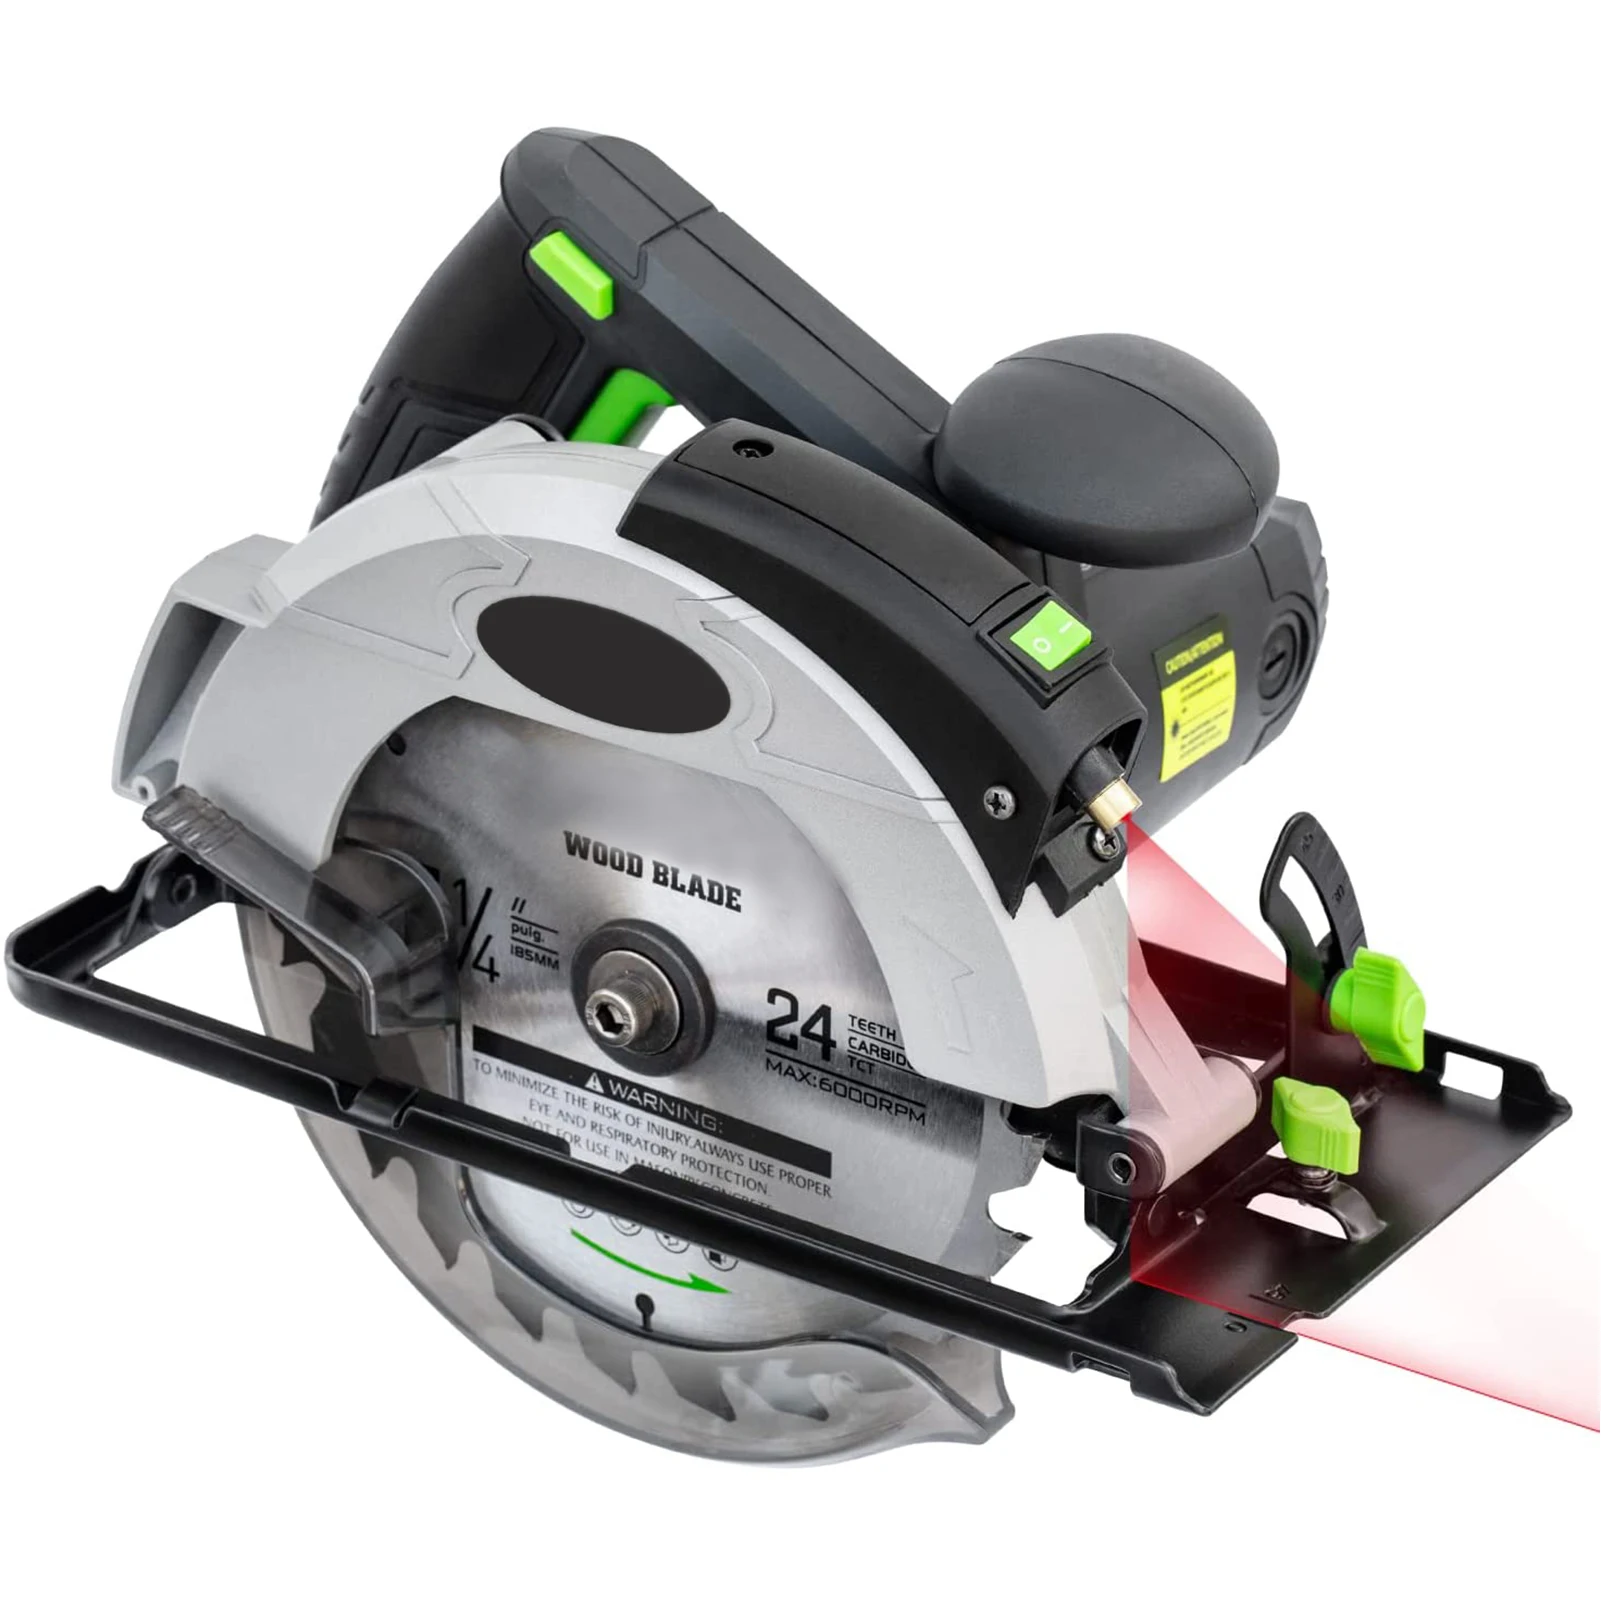 12A Corded Electric Circular Saw 5500RPM with 7-1/4'' Saw Blade Laser Guide 2.45'' (90°) & 1.81'' (45°) Max Wood Cutting Depth